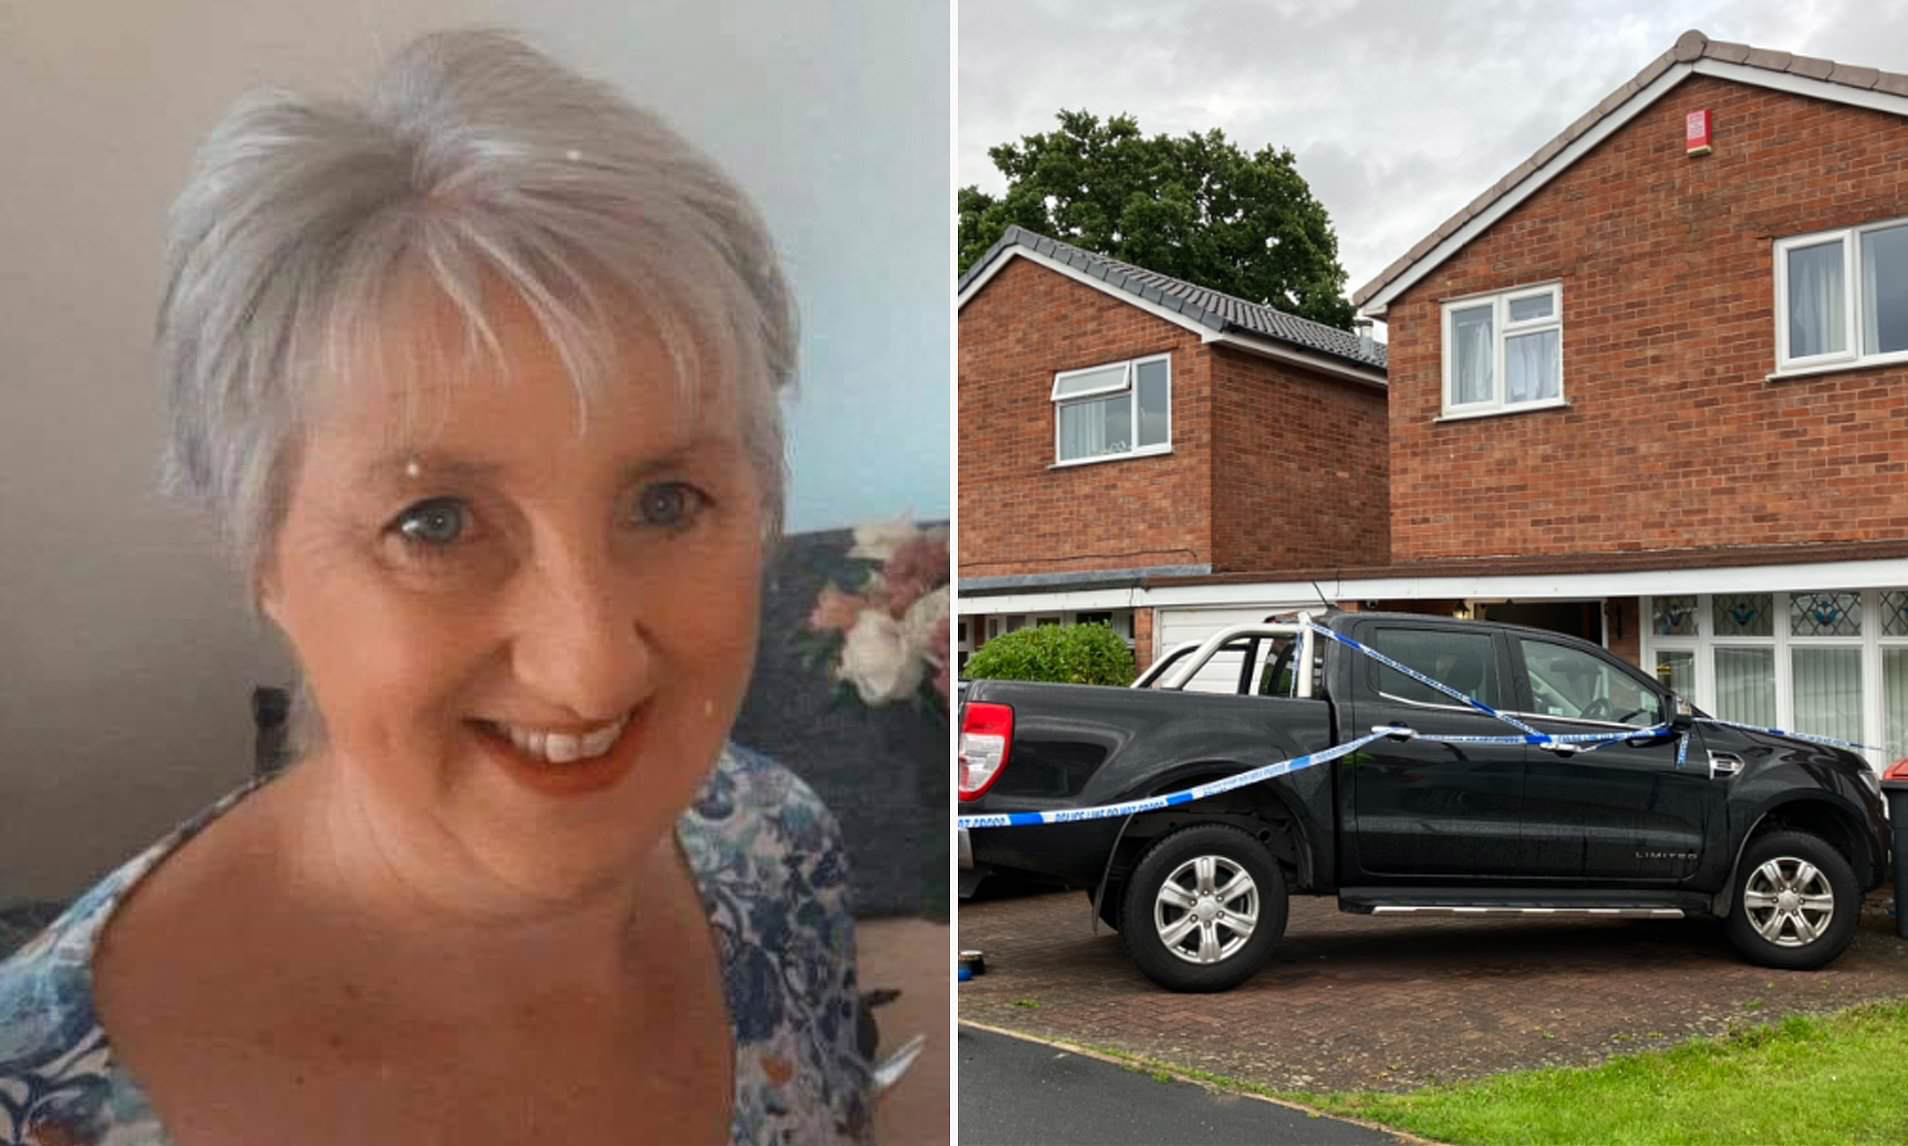 Man 31 Accused Of Murdering Nurse 58 Is Detained In A Secure Hospital As Her Daughter Pays 